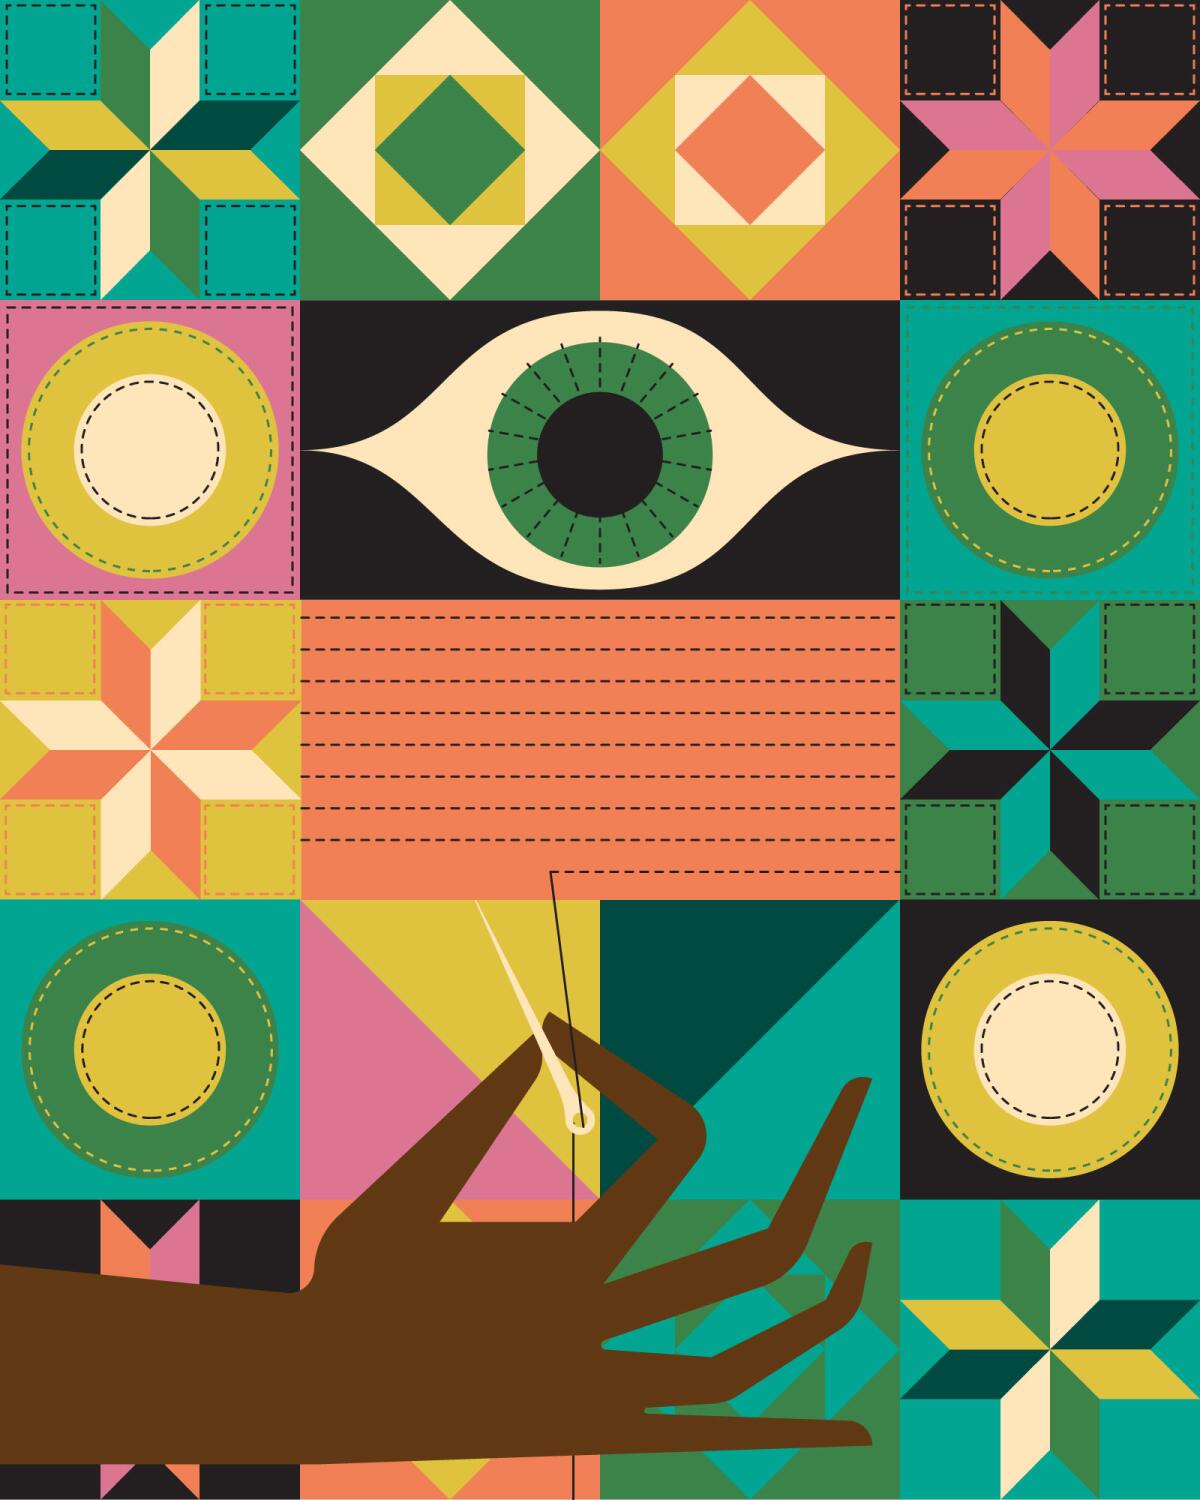 A black hand is silhouetted against a quilt with geometric patterns and an eye.